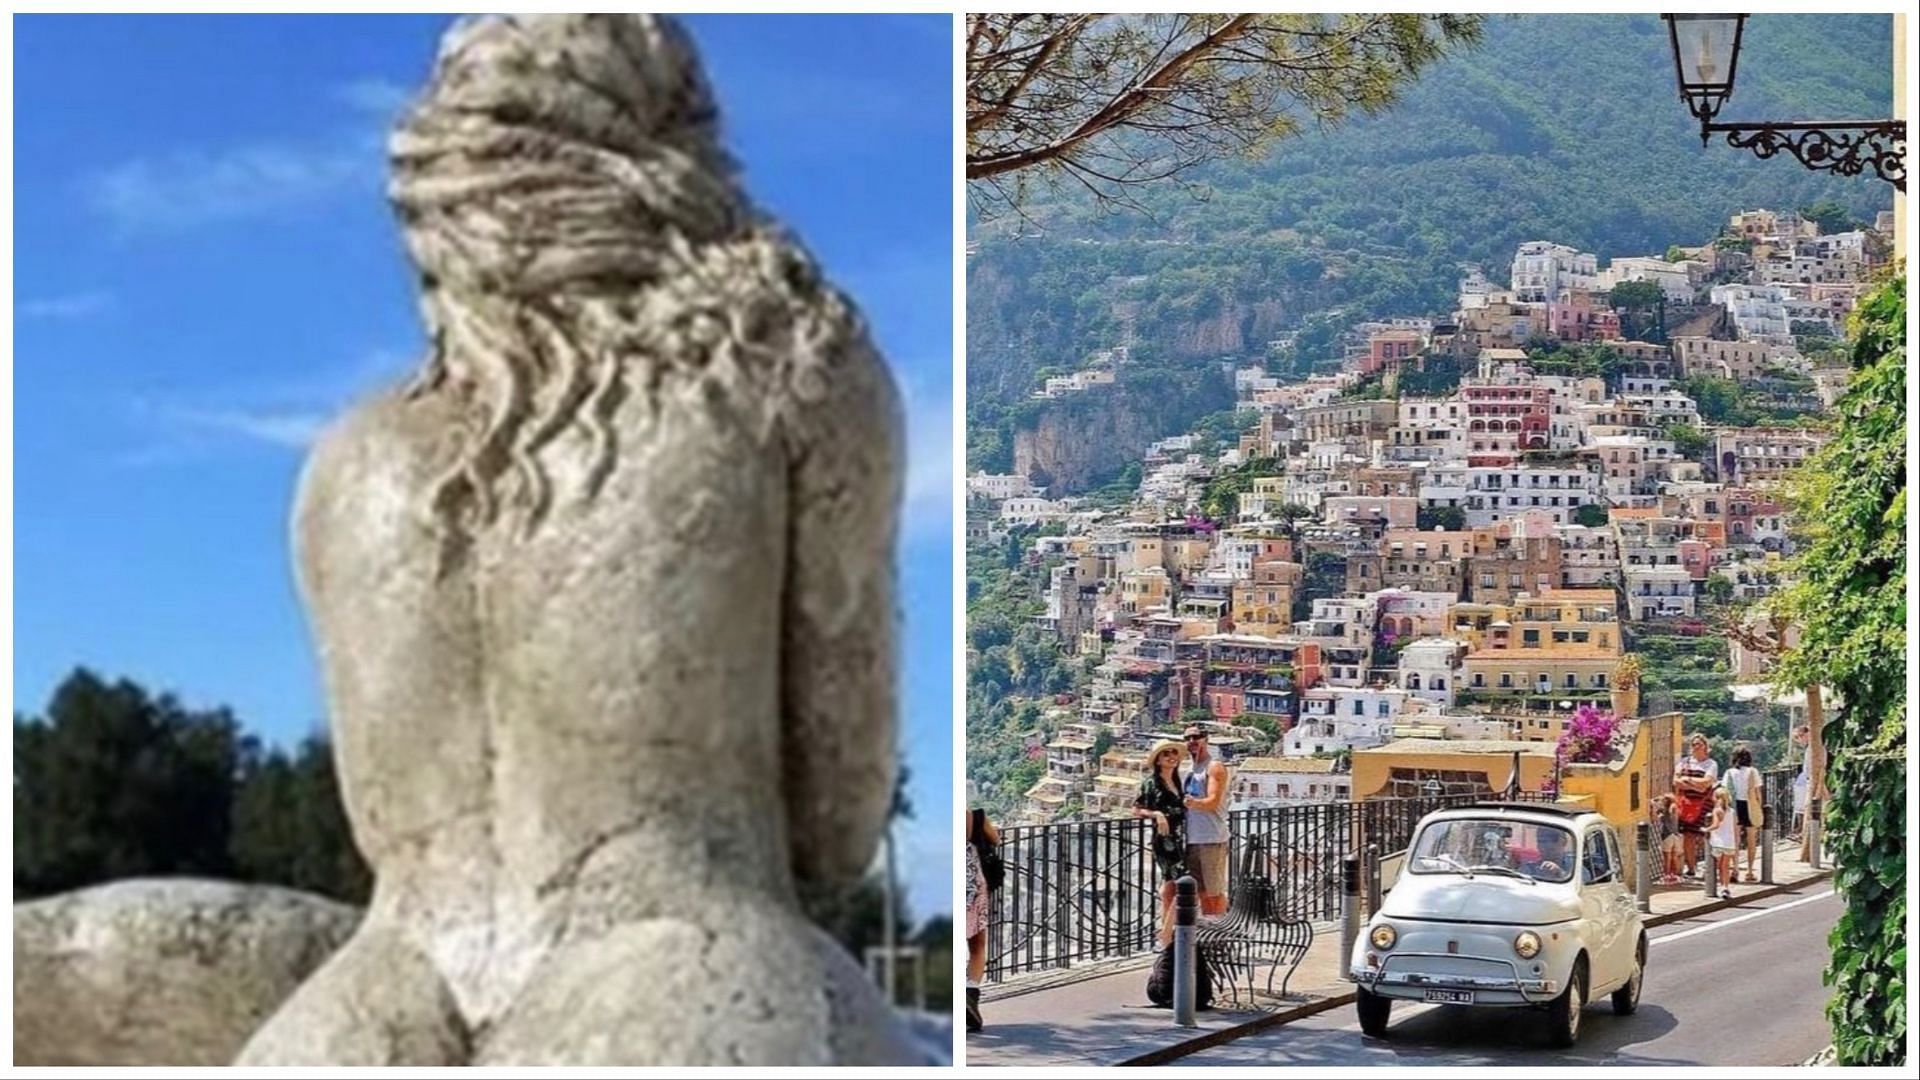 The &quot;curvy&quot; mermaid statue in Italy has been gaining popularity due to its voluptuous figure (Image via Twitter/ xxNinTwinDoxx &amp; Exulansista)